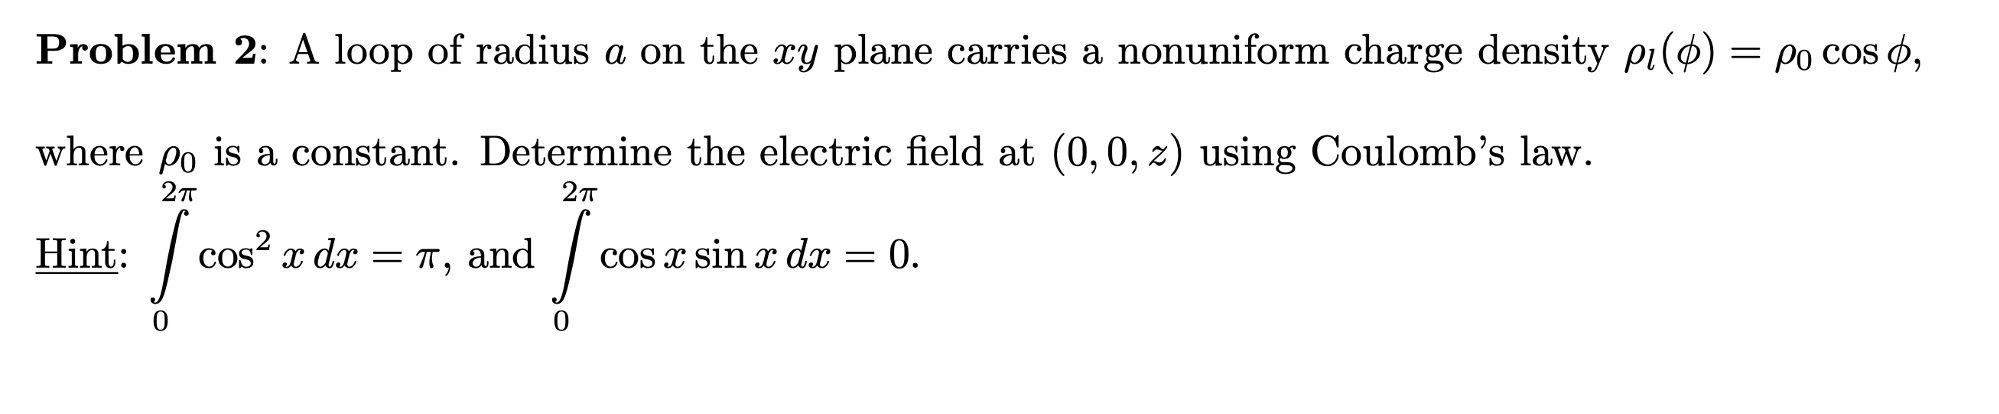 Problem 2: A loop of radius a on the xy plane carries a nonuniform charge density pi(ø) = po cos ø,
where po is a constant. Determine the electric field at (0,0, z) using Coulomb's law.
2п
Hint:
cos? x dx
and
Cos x sin x dx = 0.
= 11,
